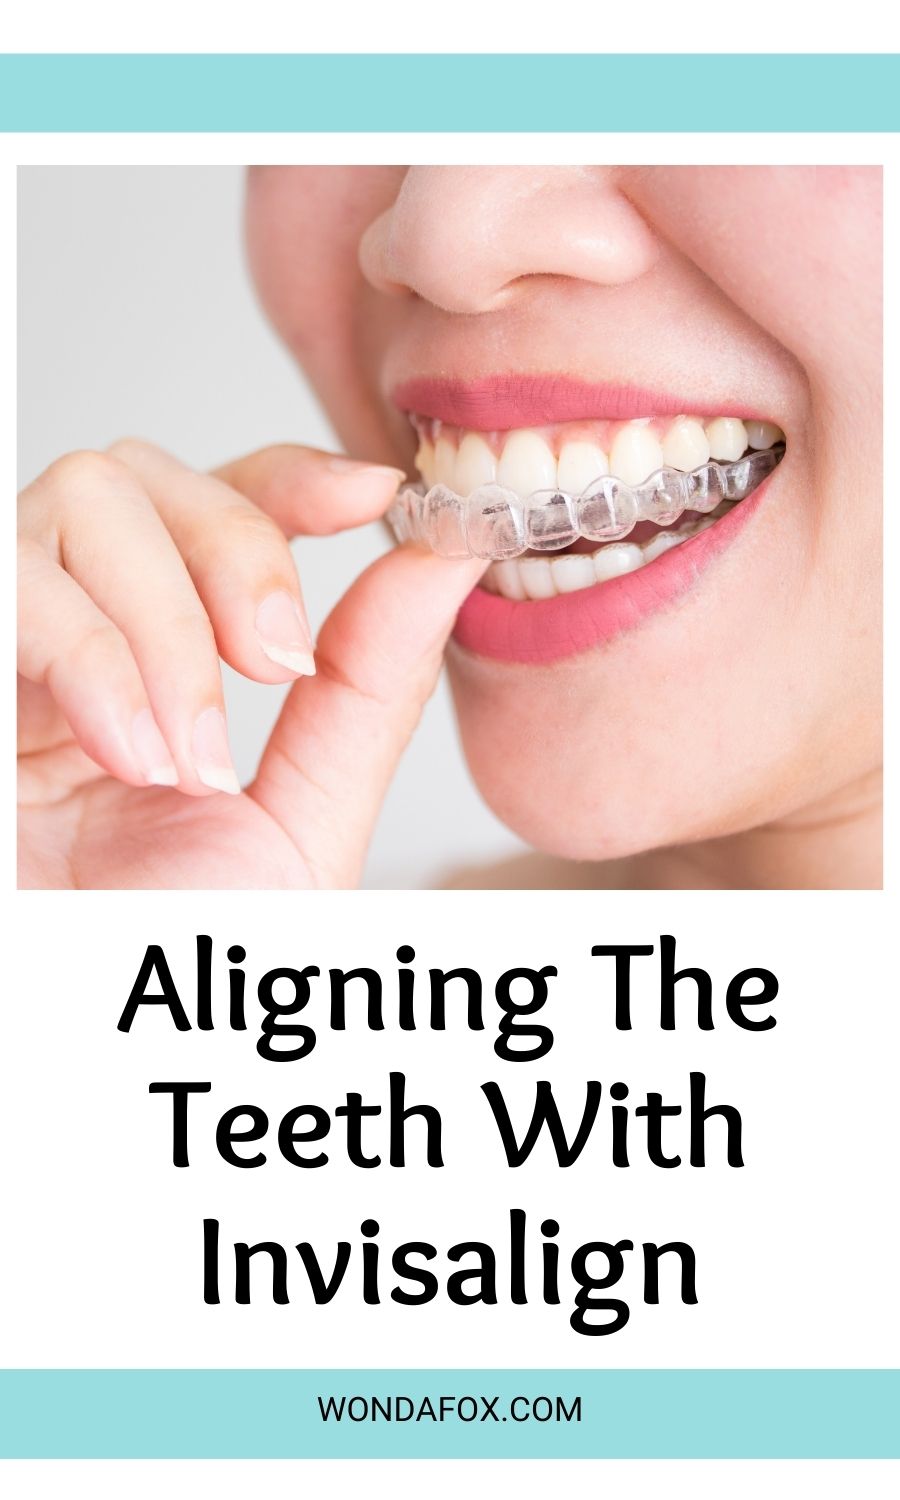 Aligning The Teeth With Invisalign